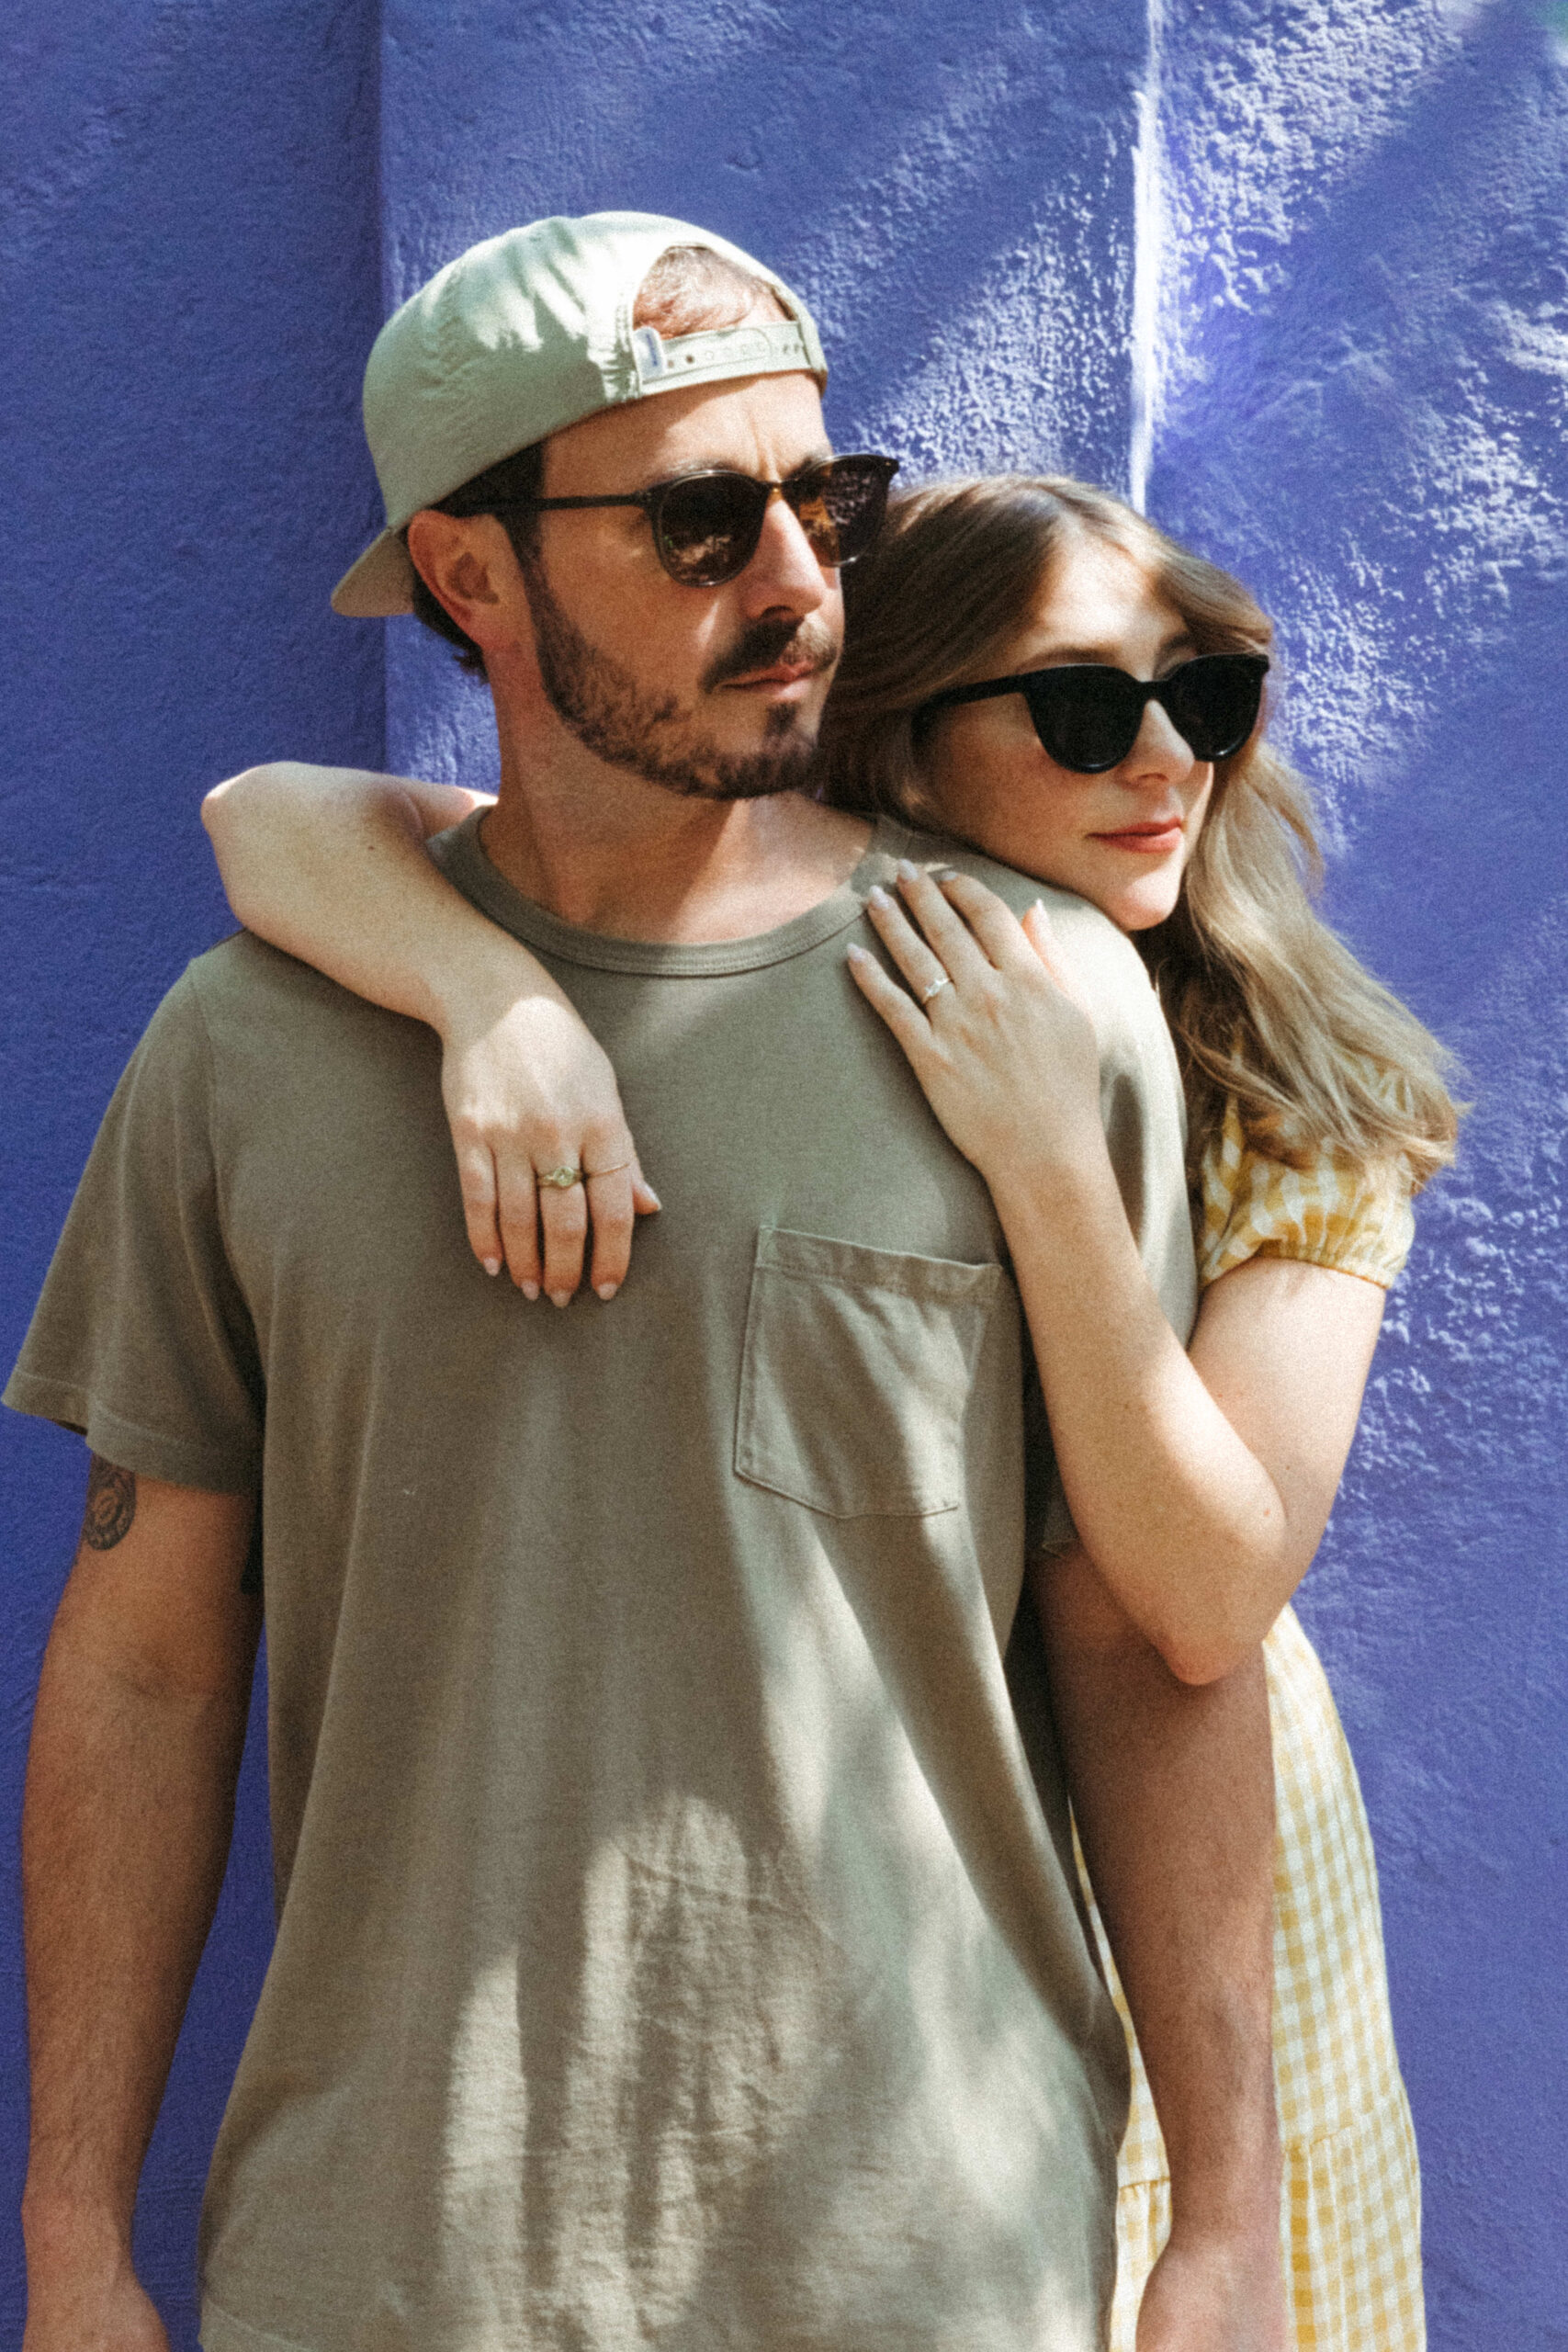 man and woman looking in the distance while wearing sunglasses in front of blue building